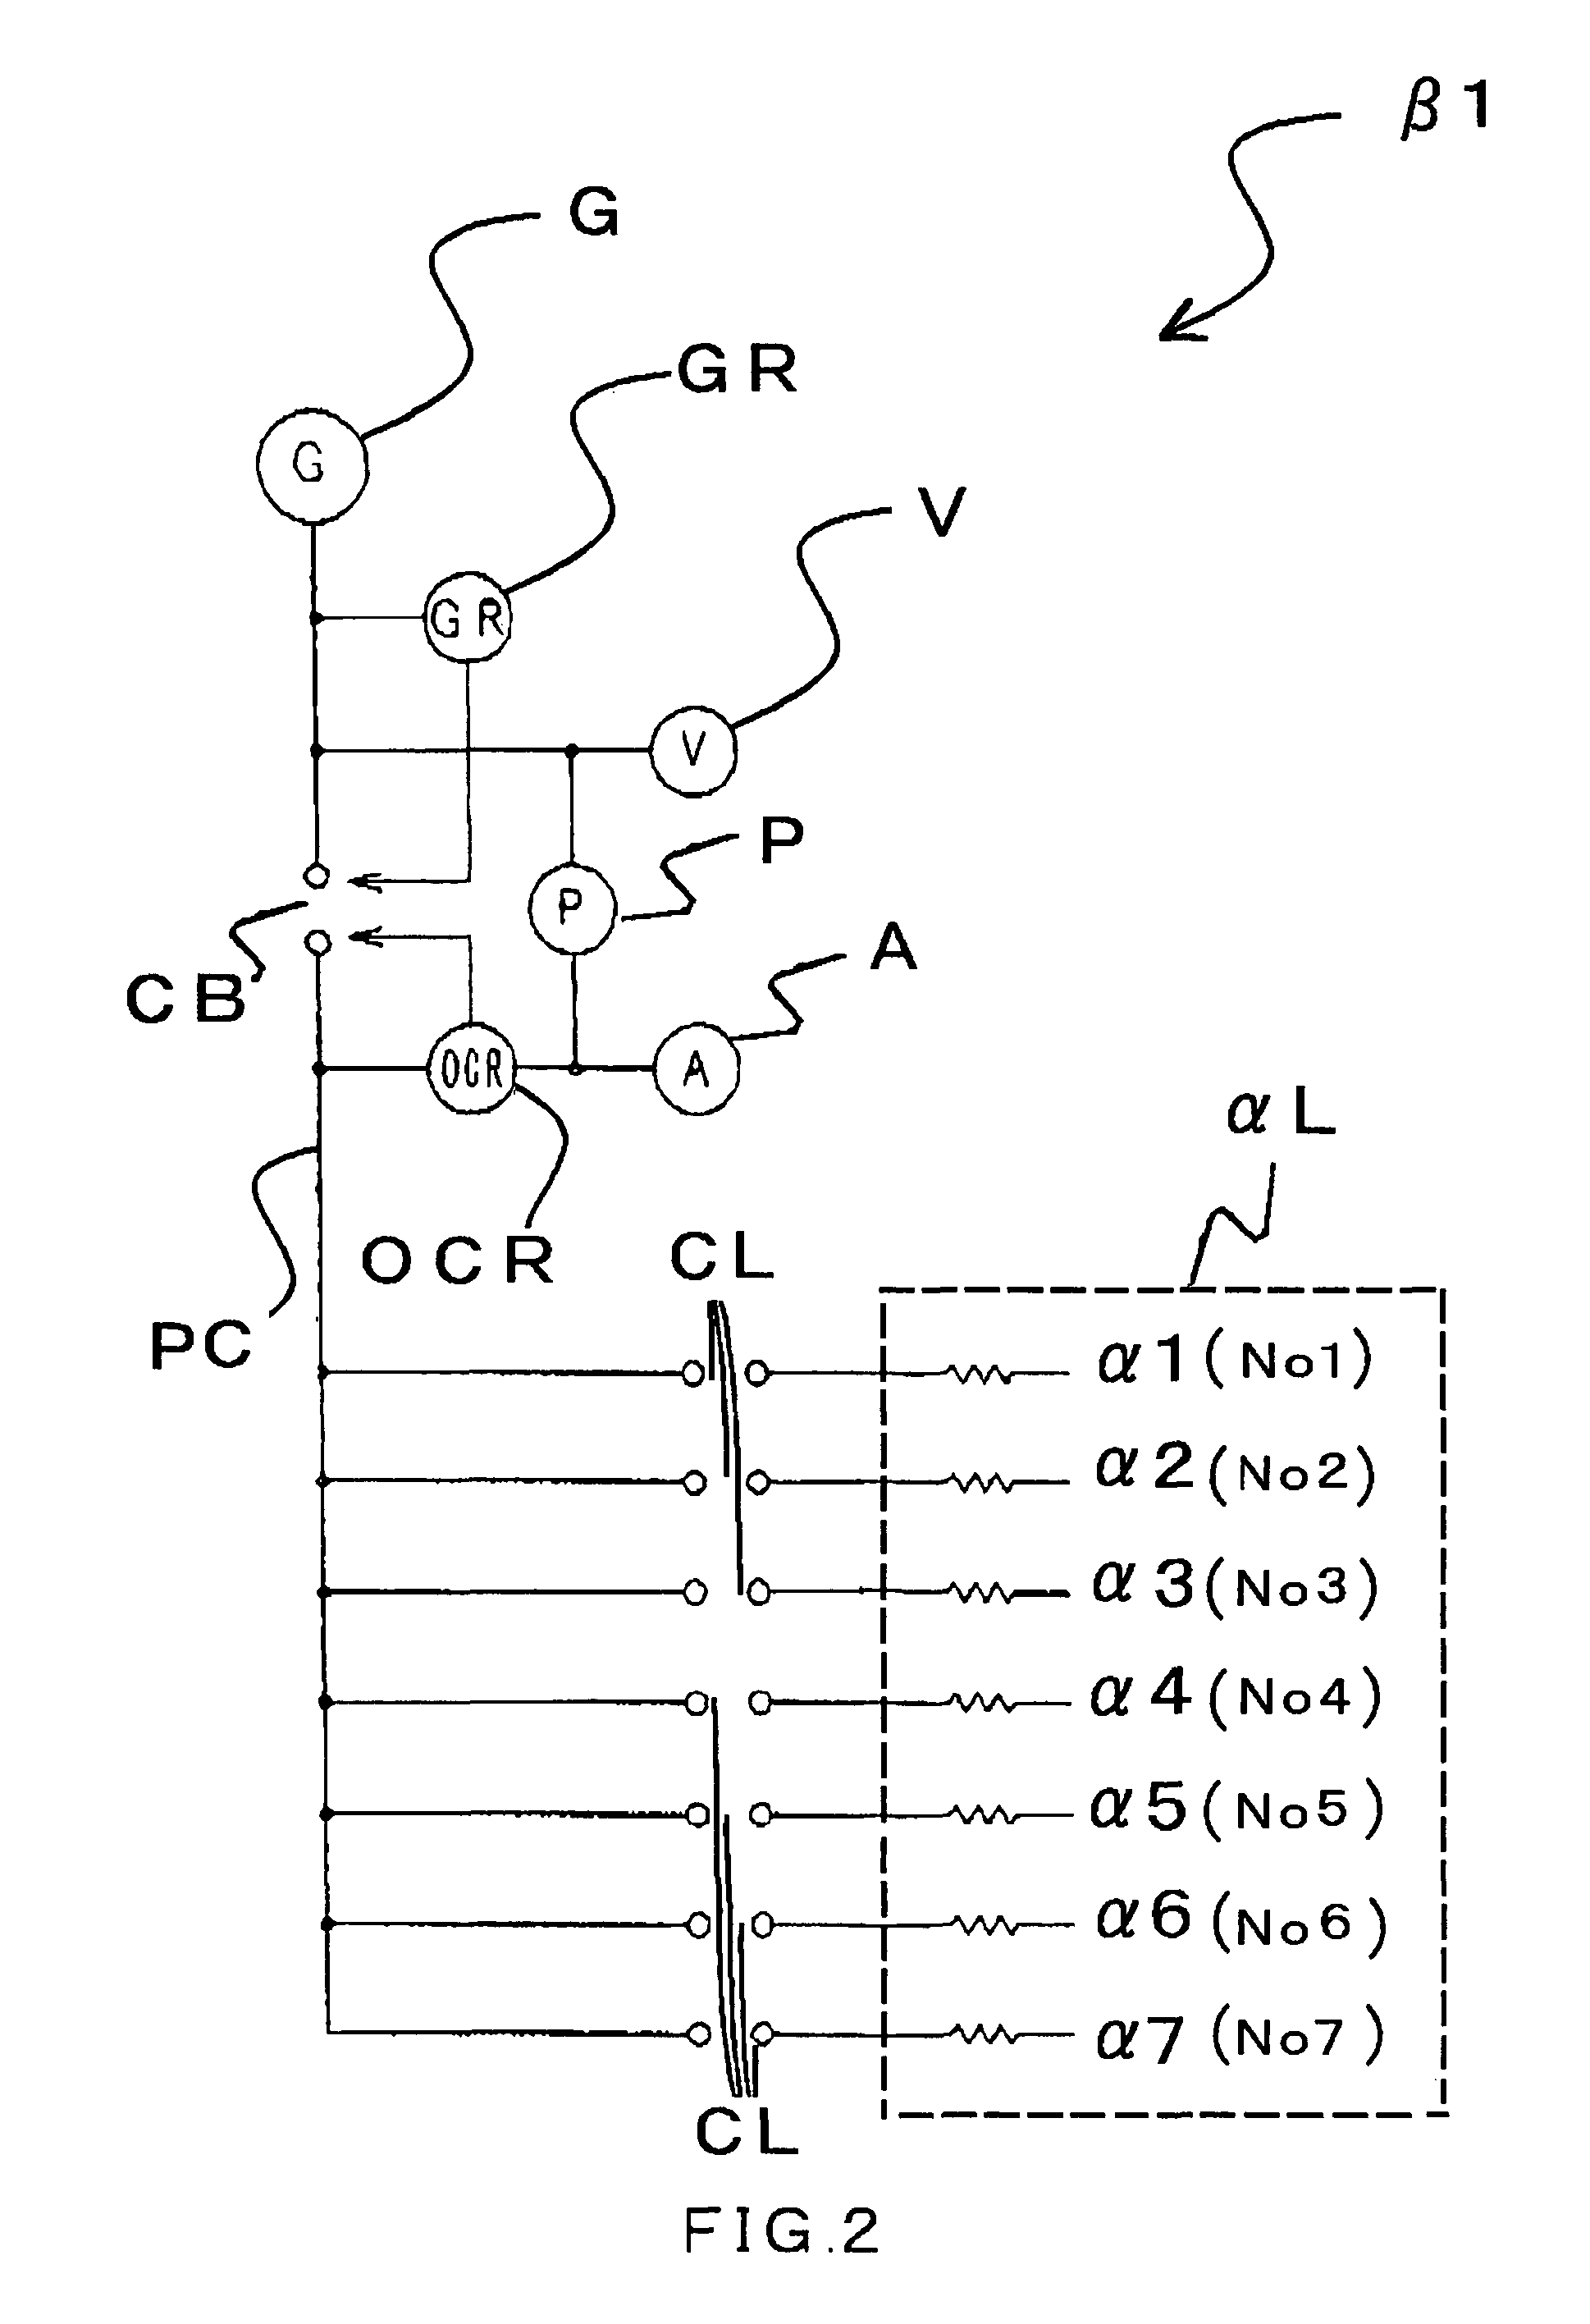 Load calculation control method and apparatus